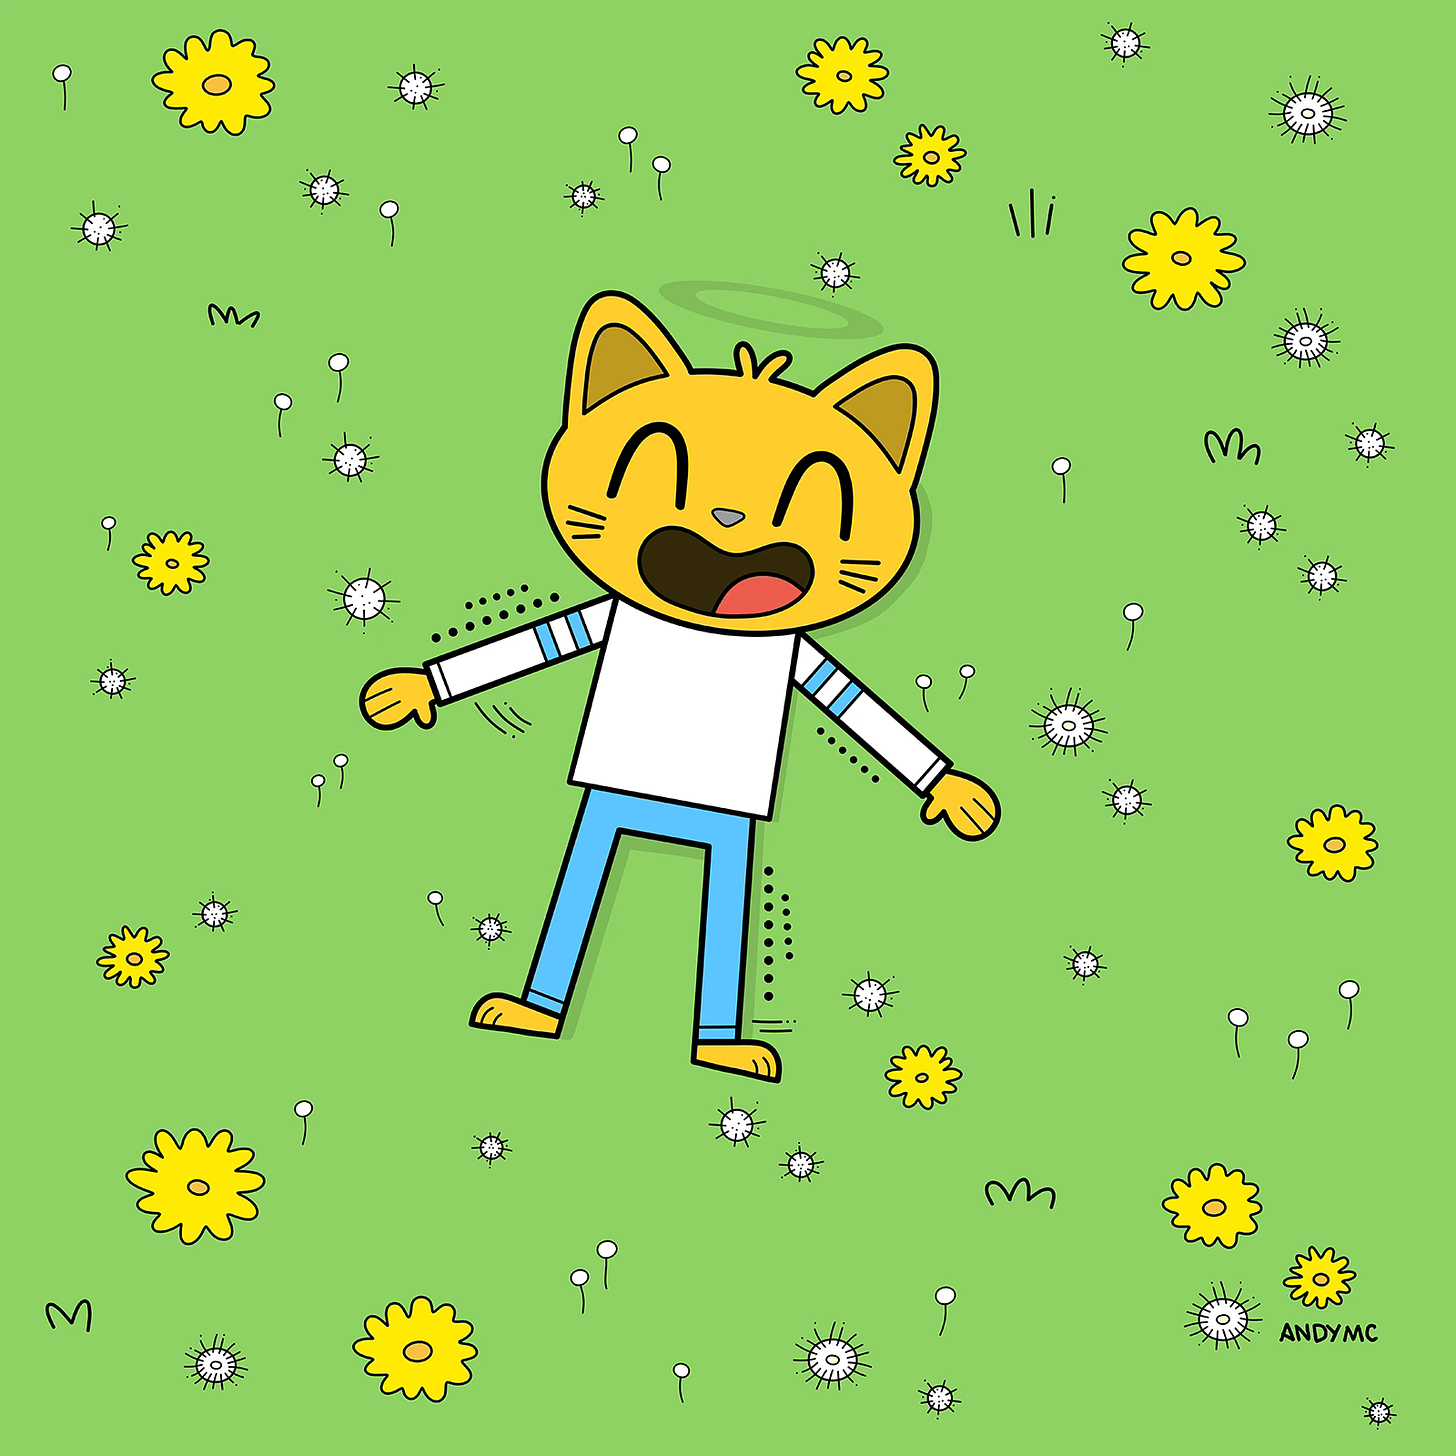 an illustration of a cat playing in the grass